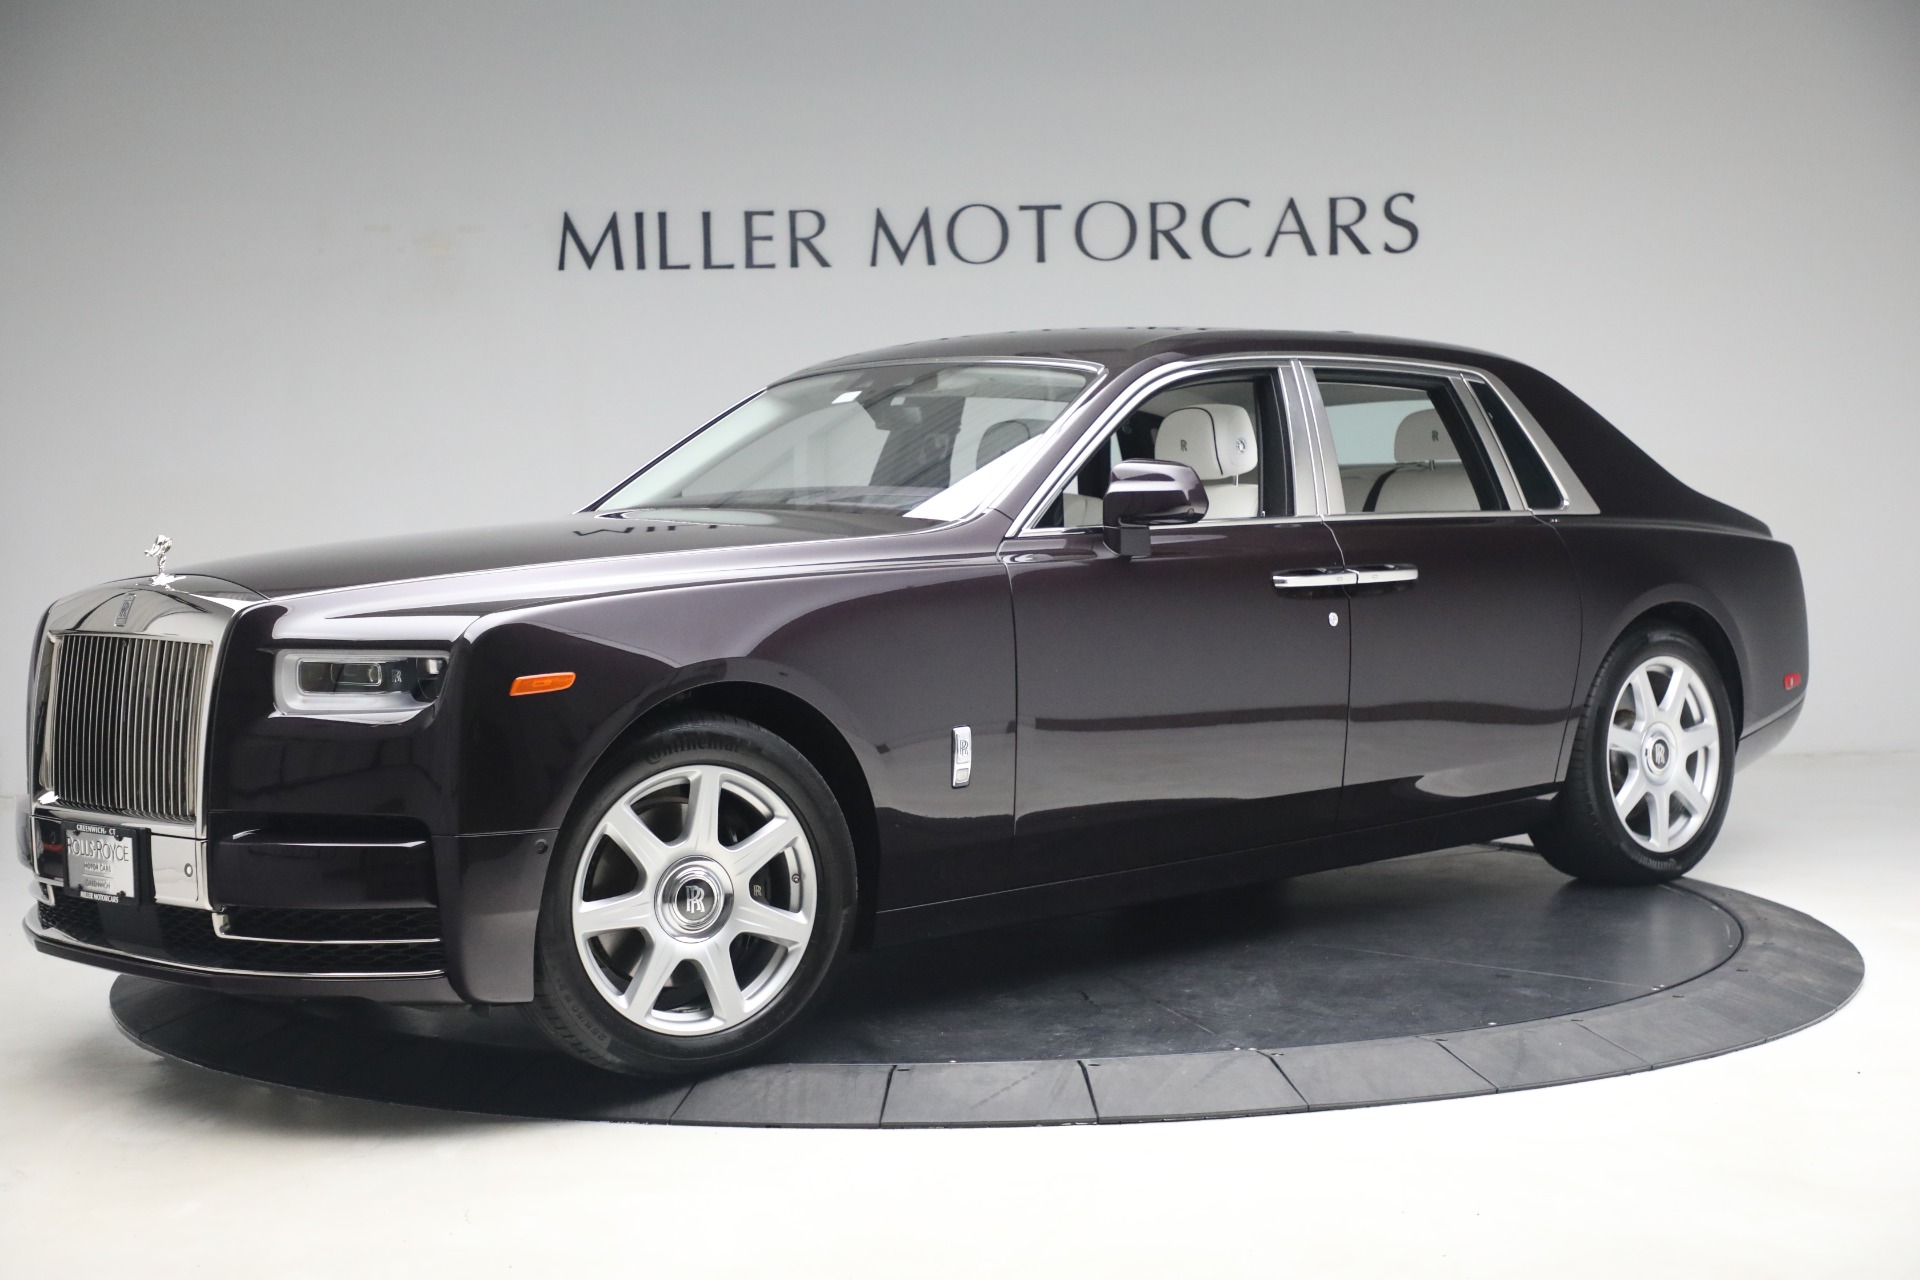 Used 2018 Rolls-Royce Phantom for sale $339,895 at Pagani of Greenwich in Greenwich CT 06830 1